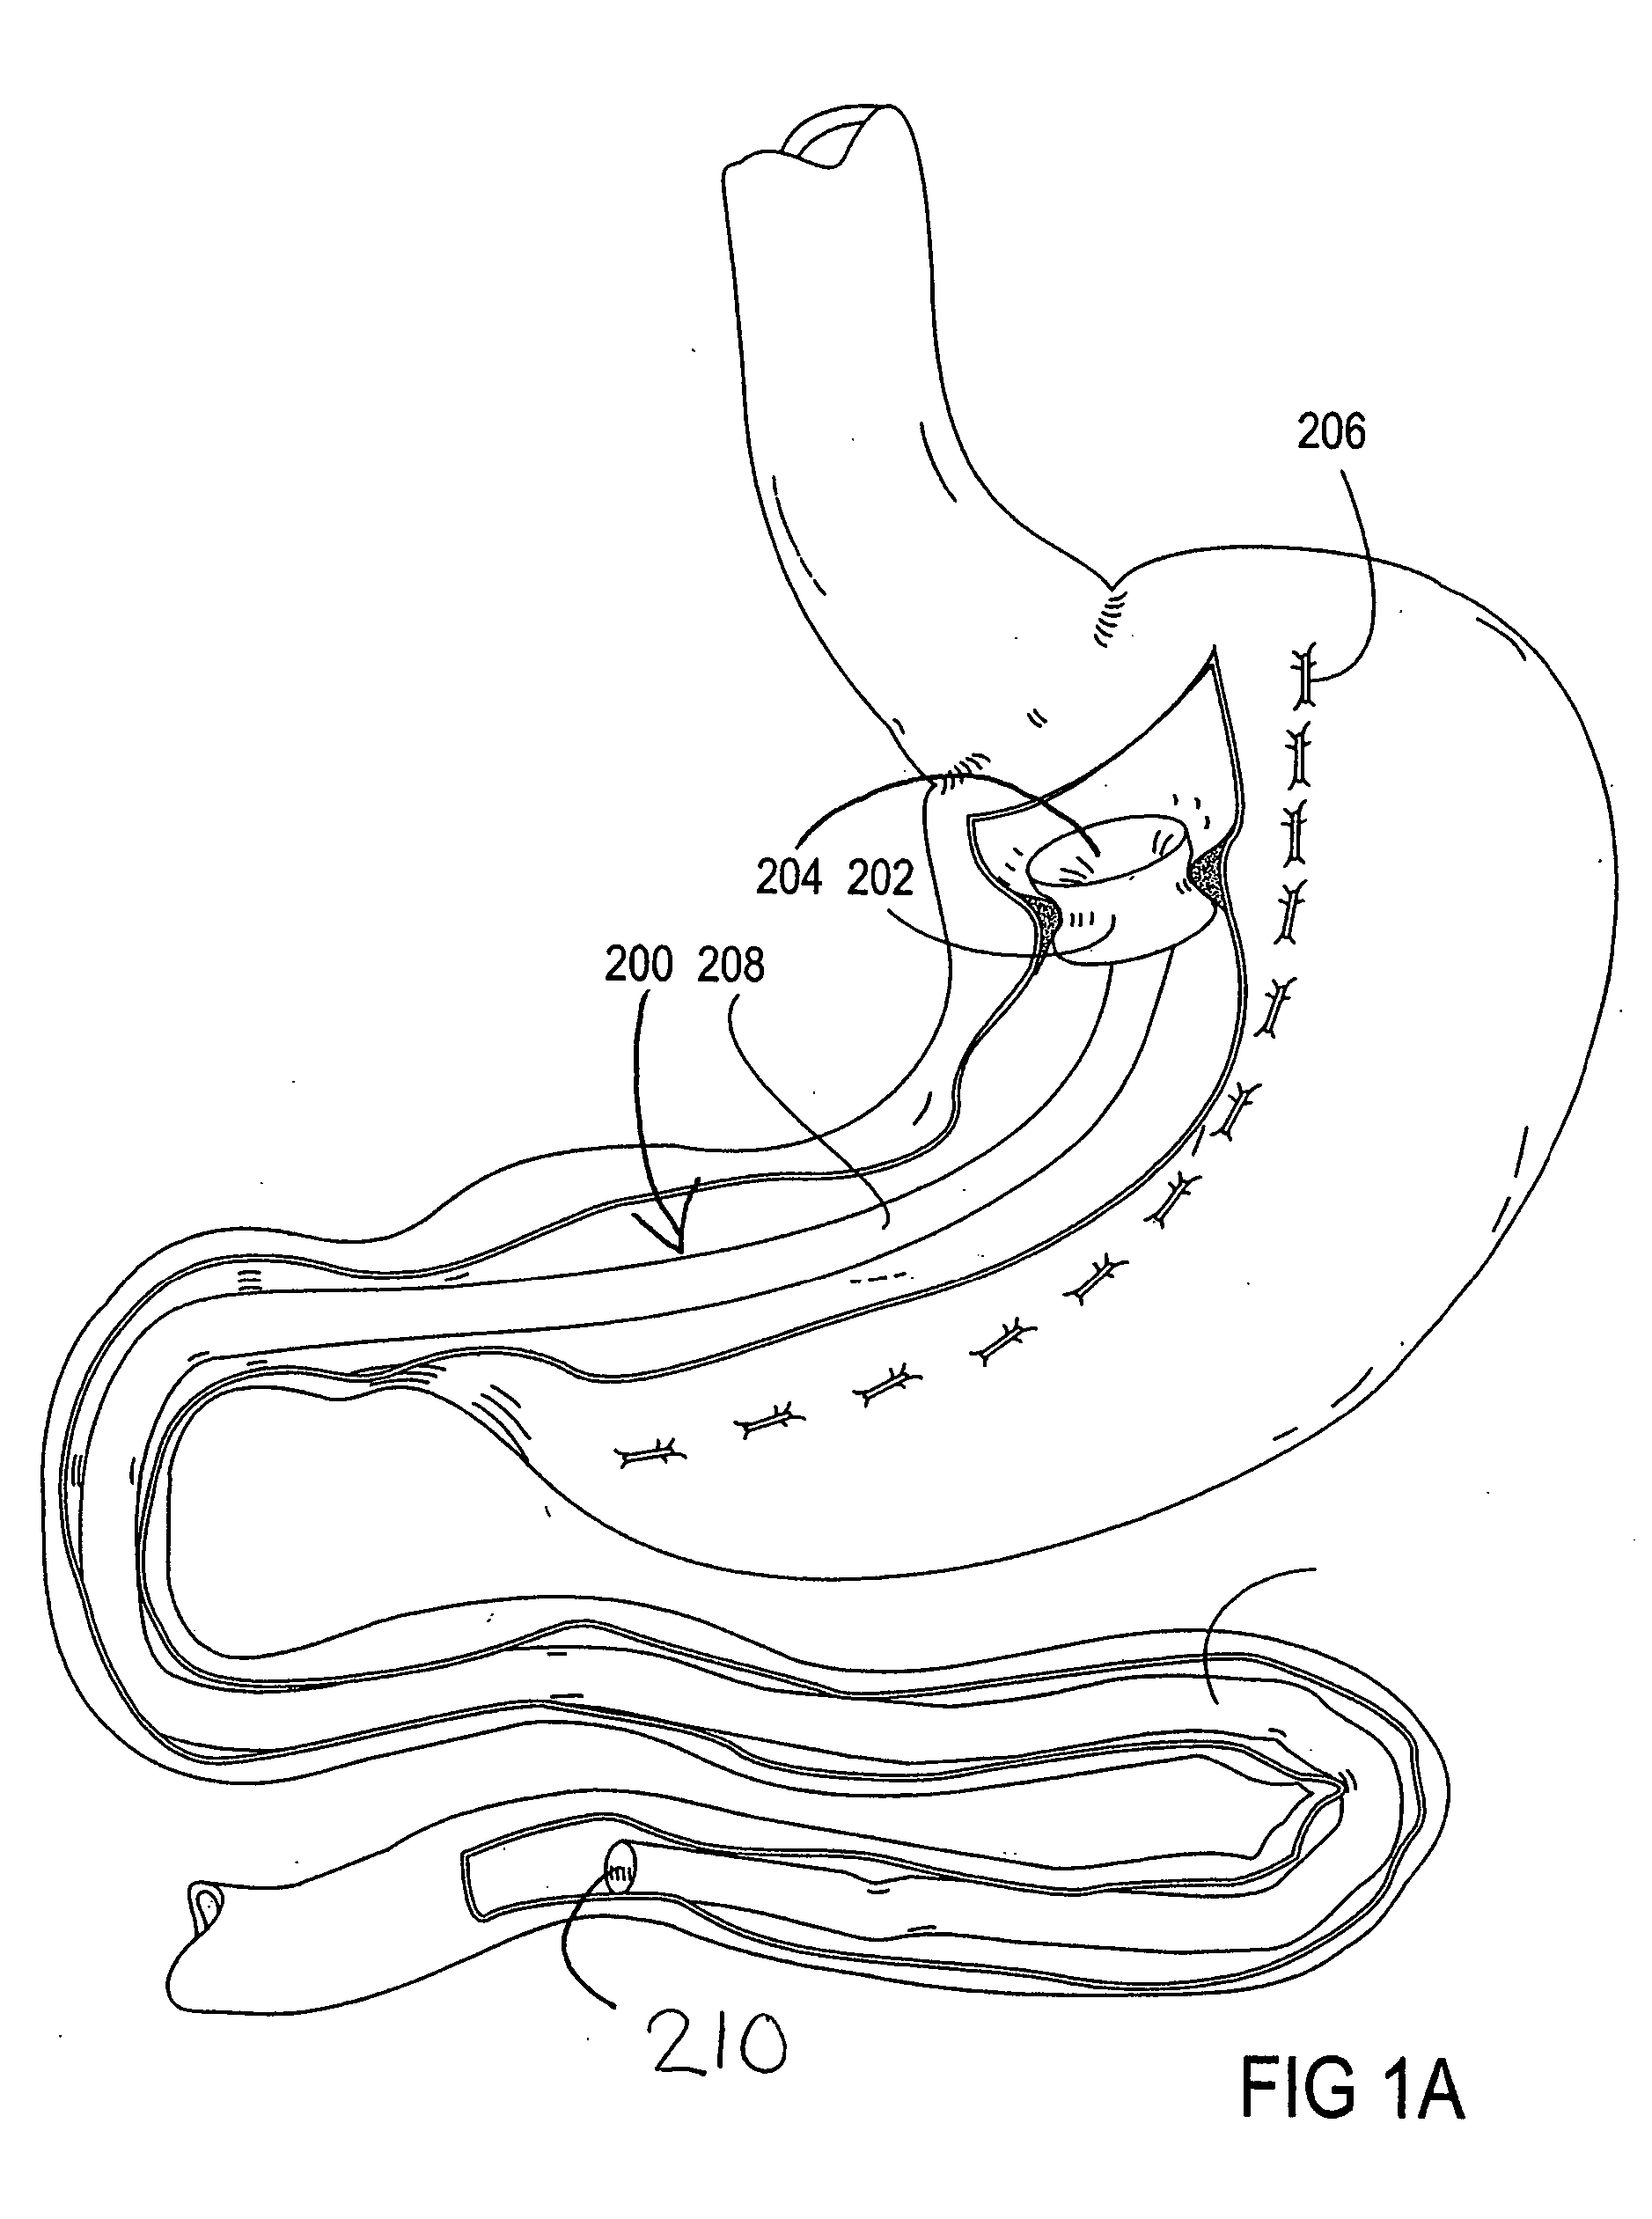 Devices and methods for treating morbid obesity